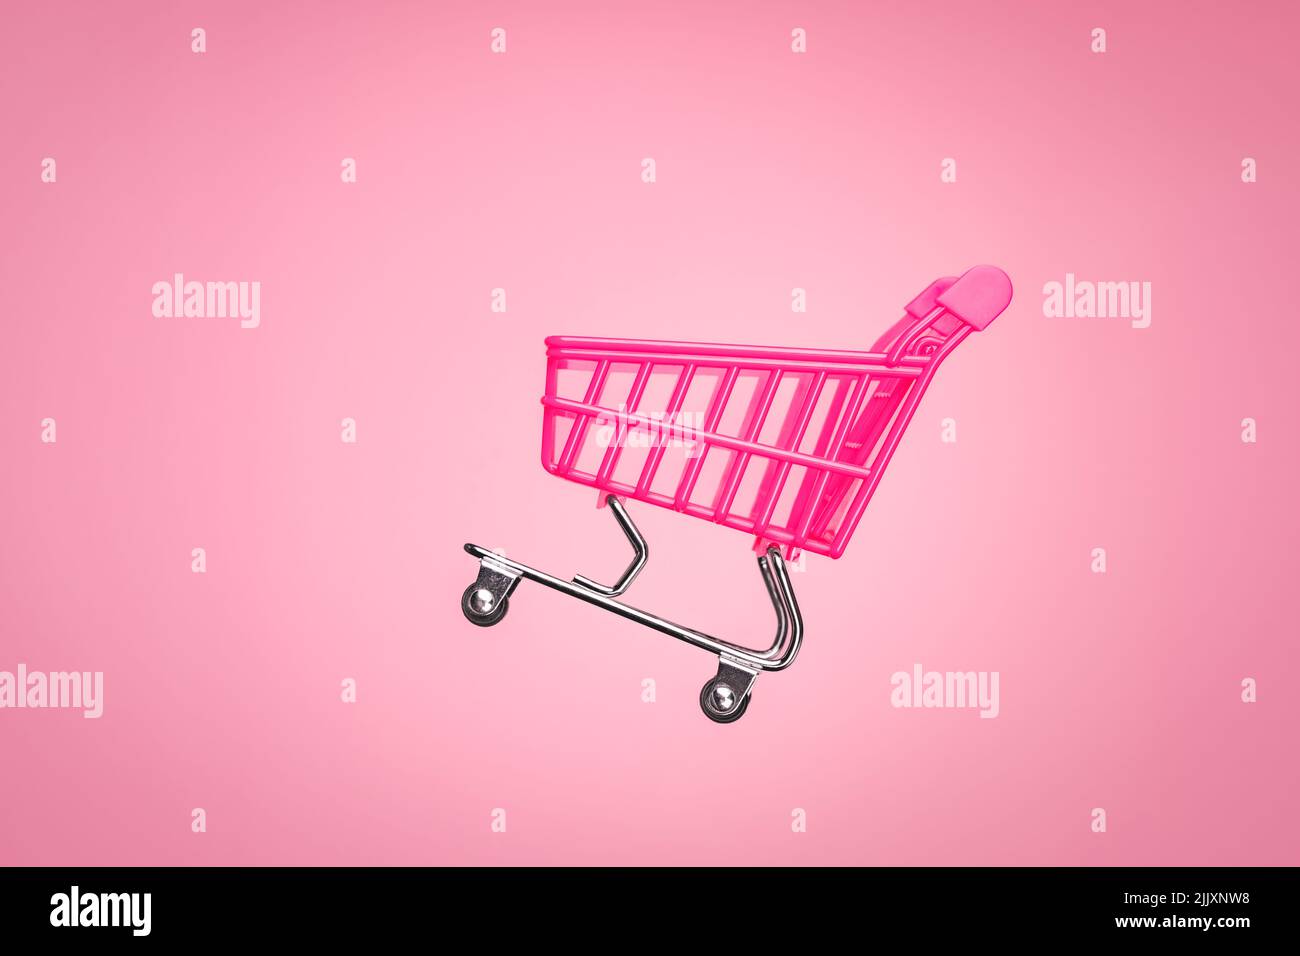 Pink shopping trolley supermarket concept. Empty trolley cart isolated pink background. Sale cart shop online marketplace. Toy pink concept sales Stock Photo